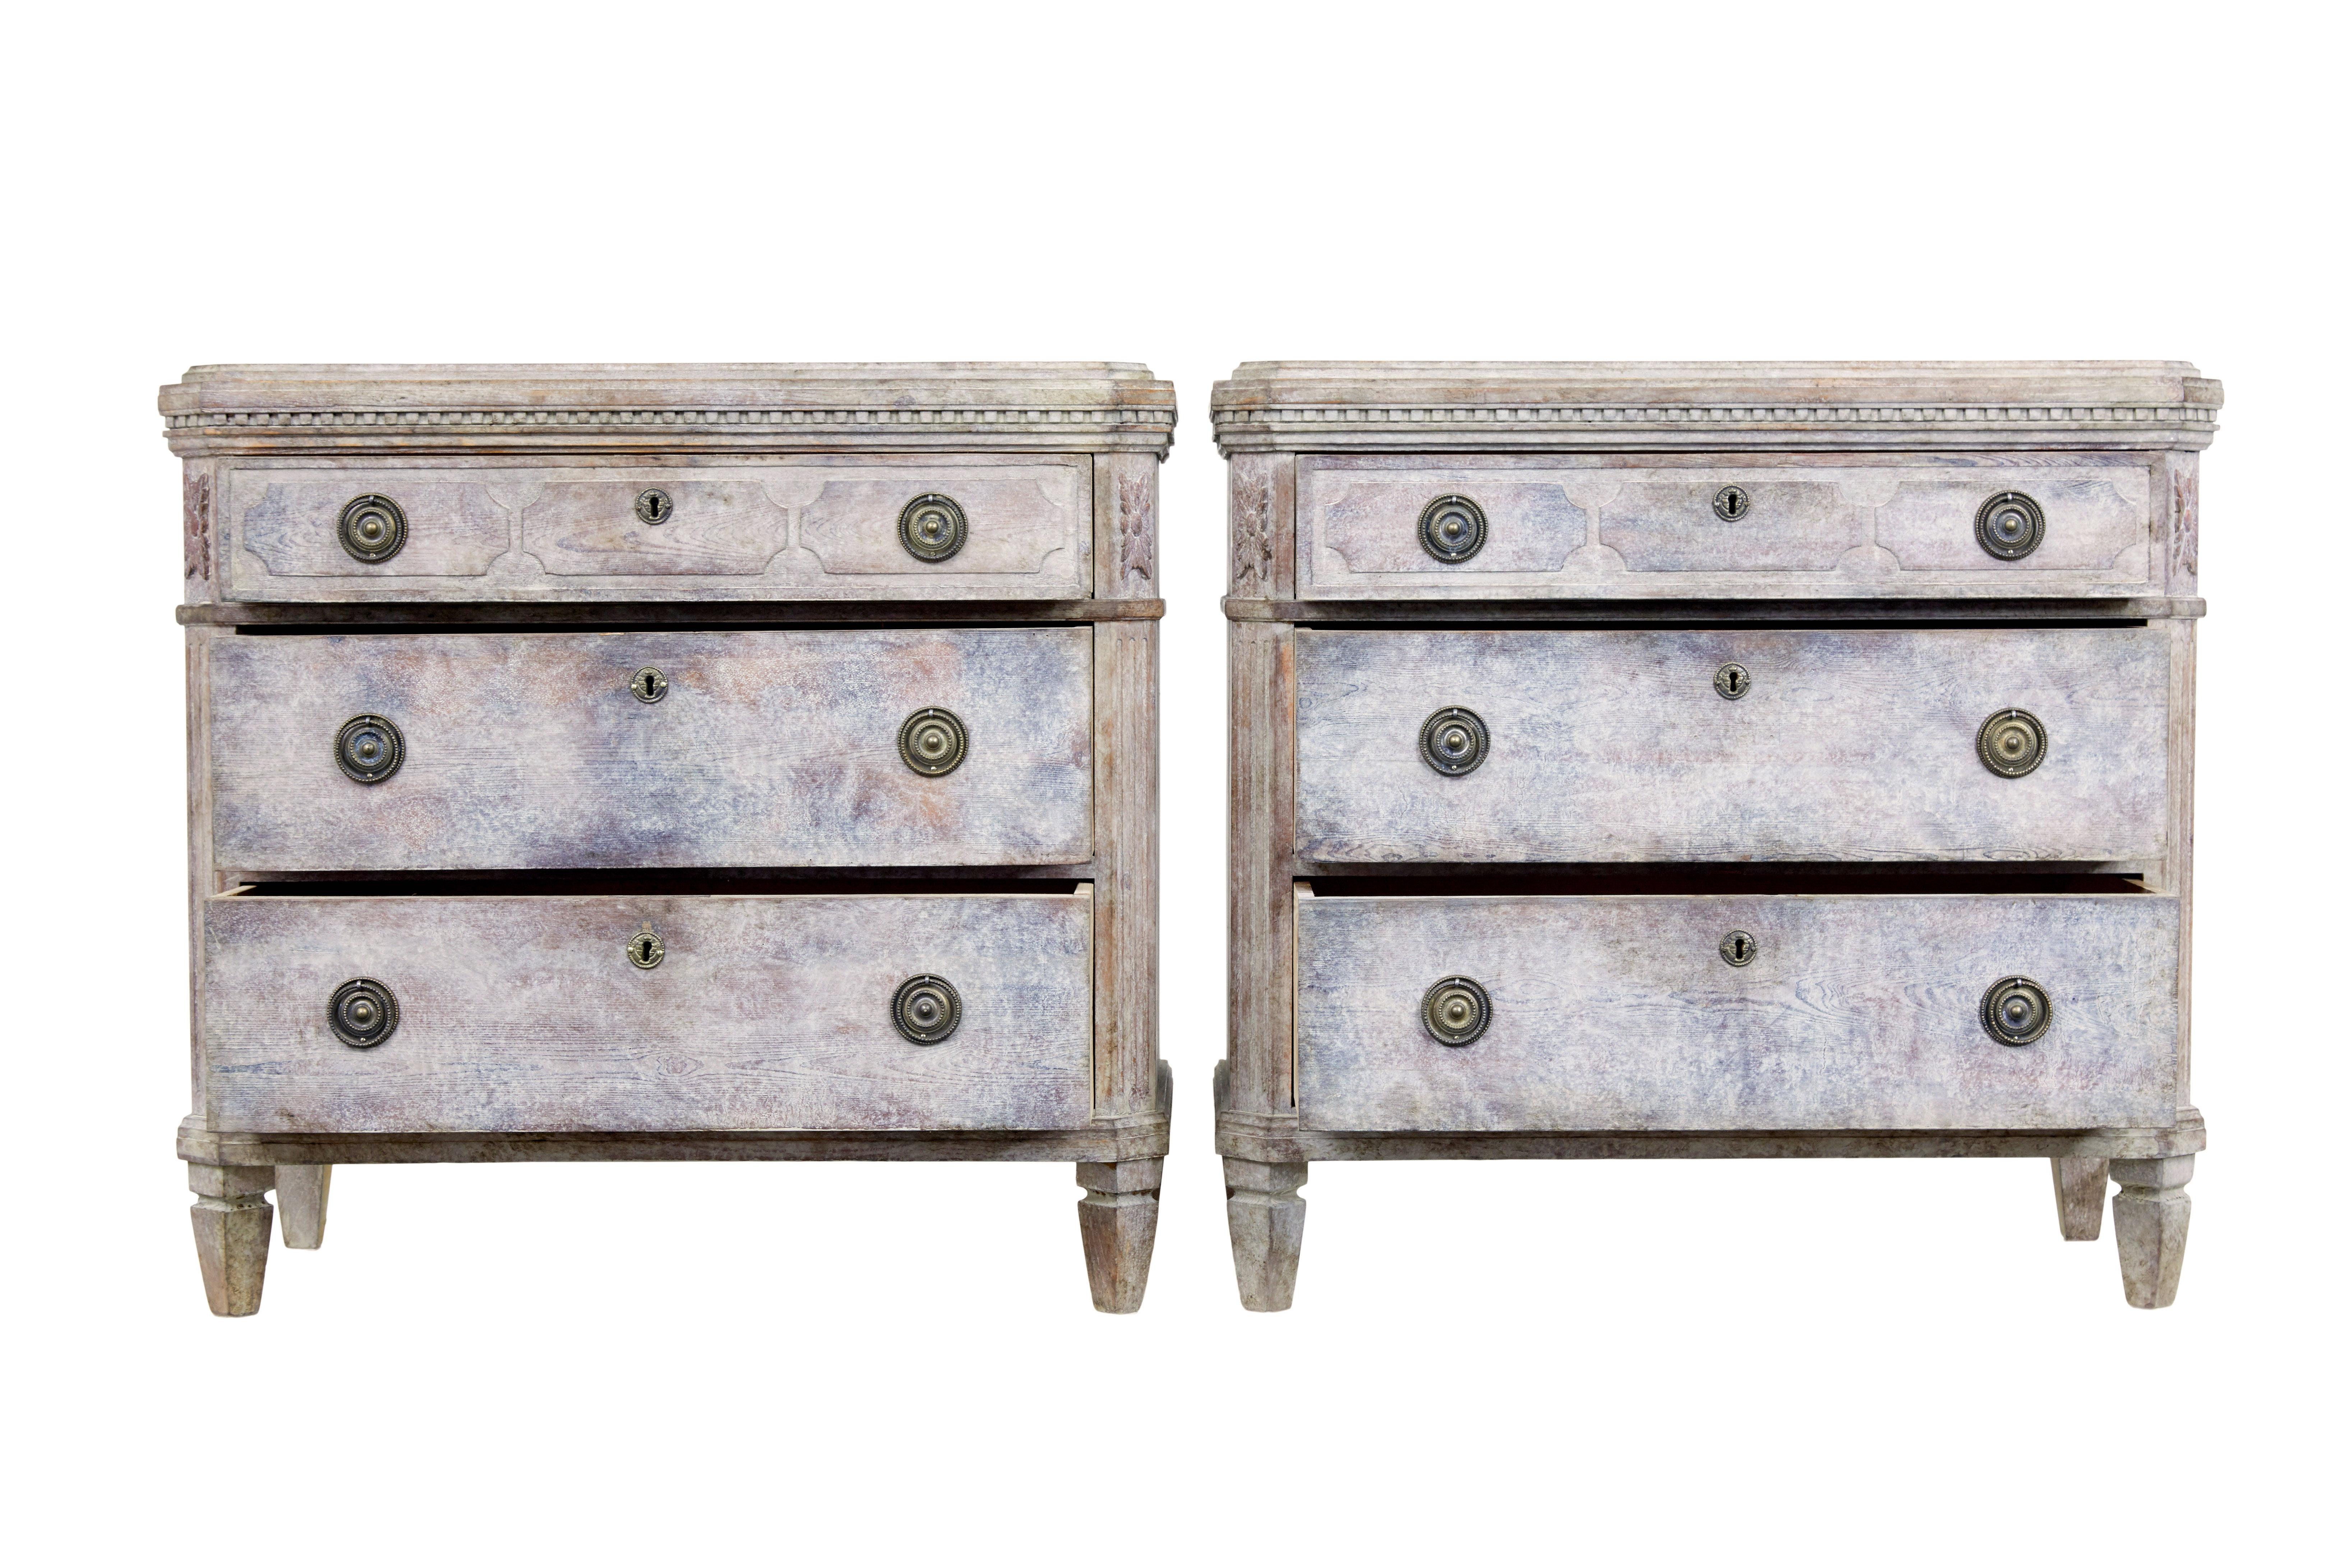 Pair of 19th century painted pine Swedish commodes circa 1880.

Here we have 2 decorative chest of drawers from Sweden painted in the gustavian taste.

Stepped rectangular top's and canted corners, with dentil moulding around the outside.  Each